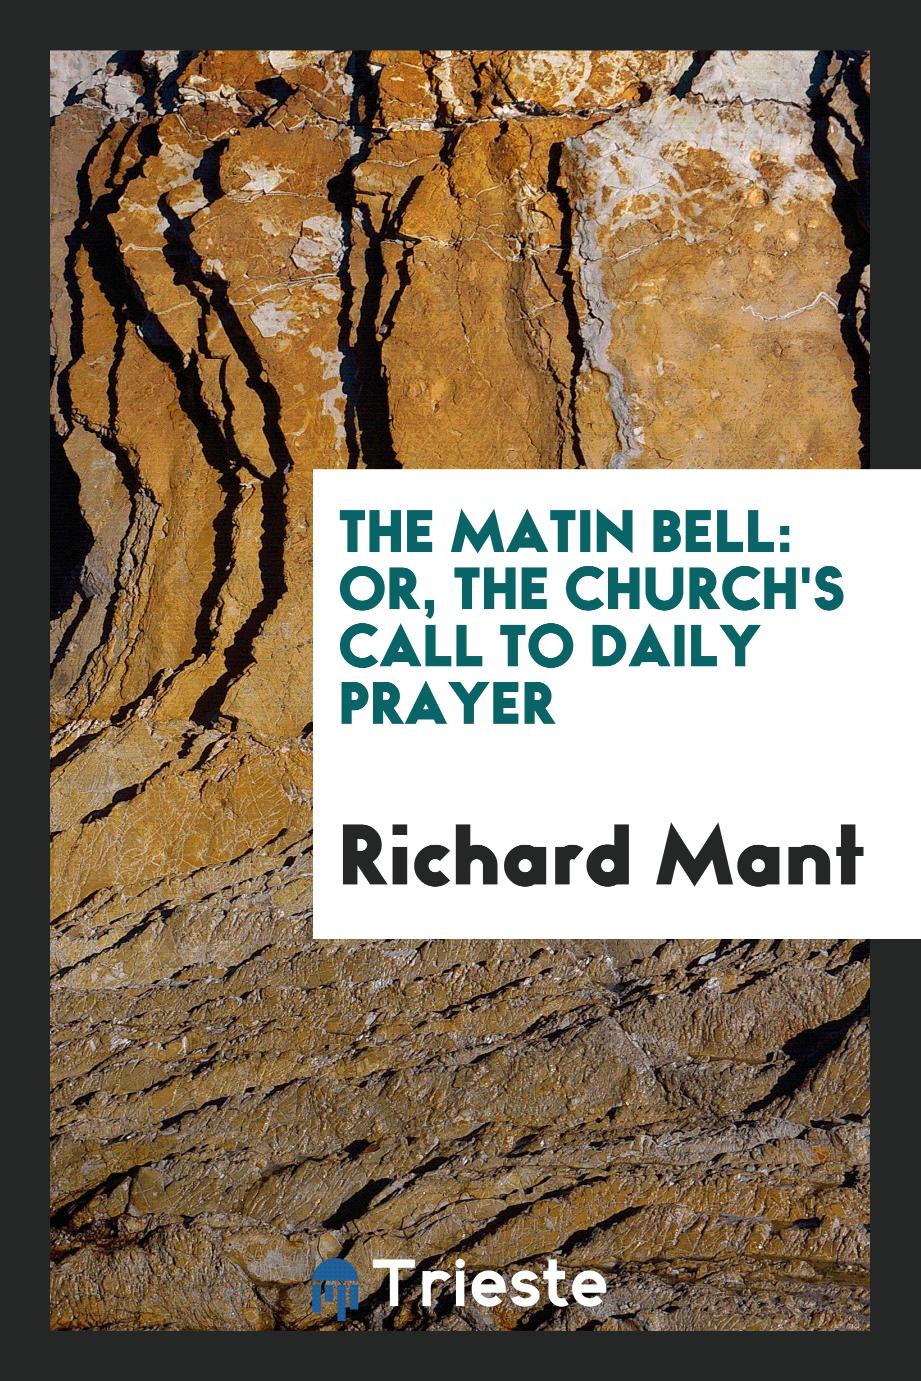 The matin bell: or, The Church's call to daily prayer